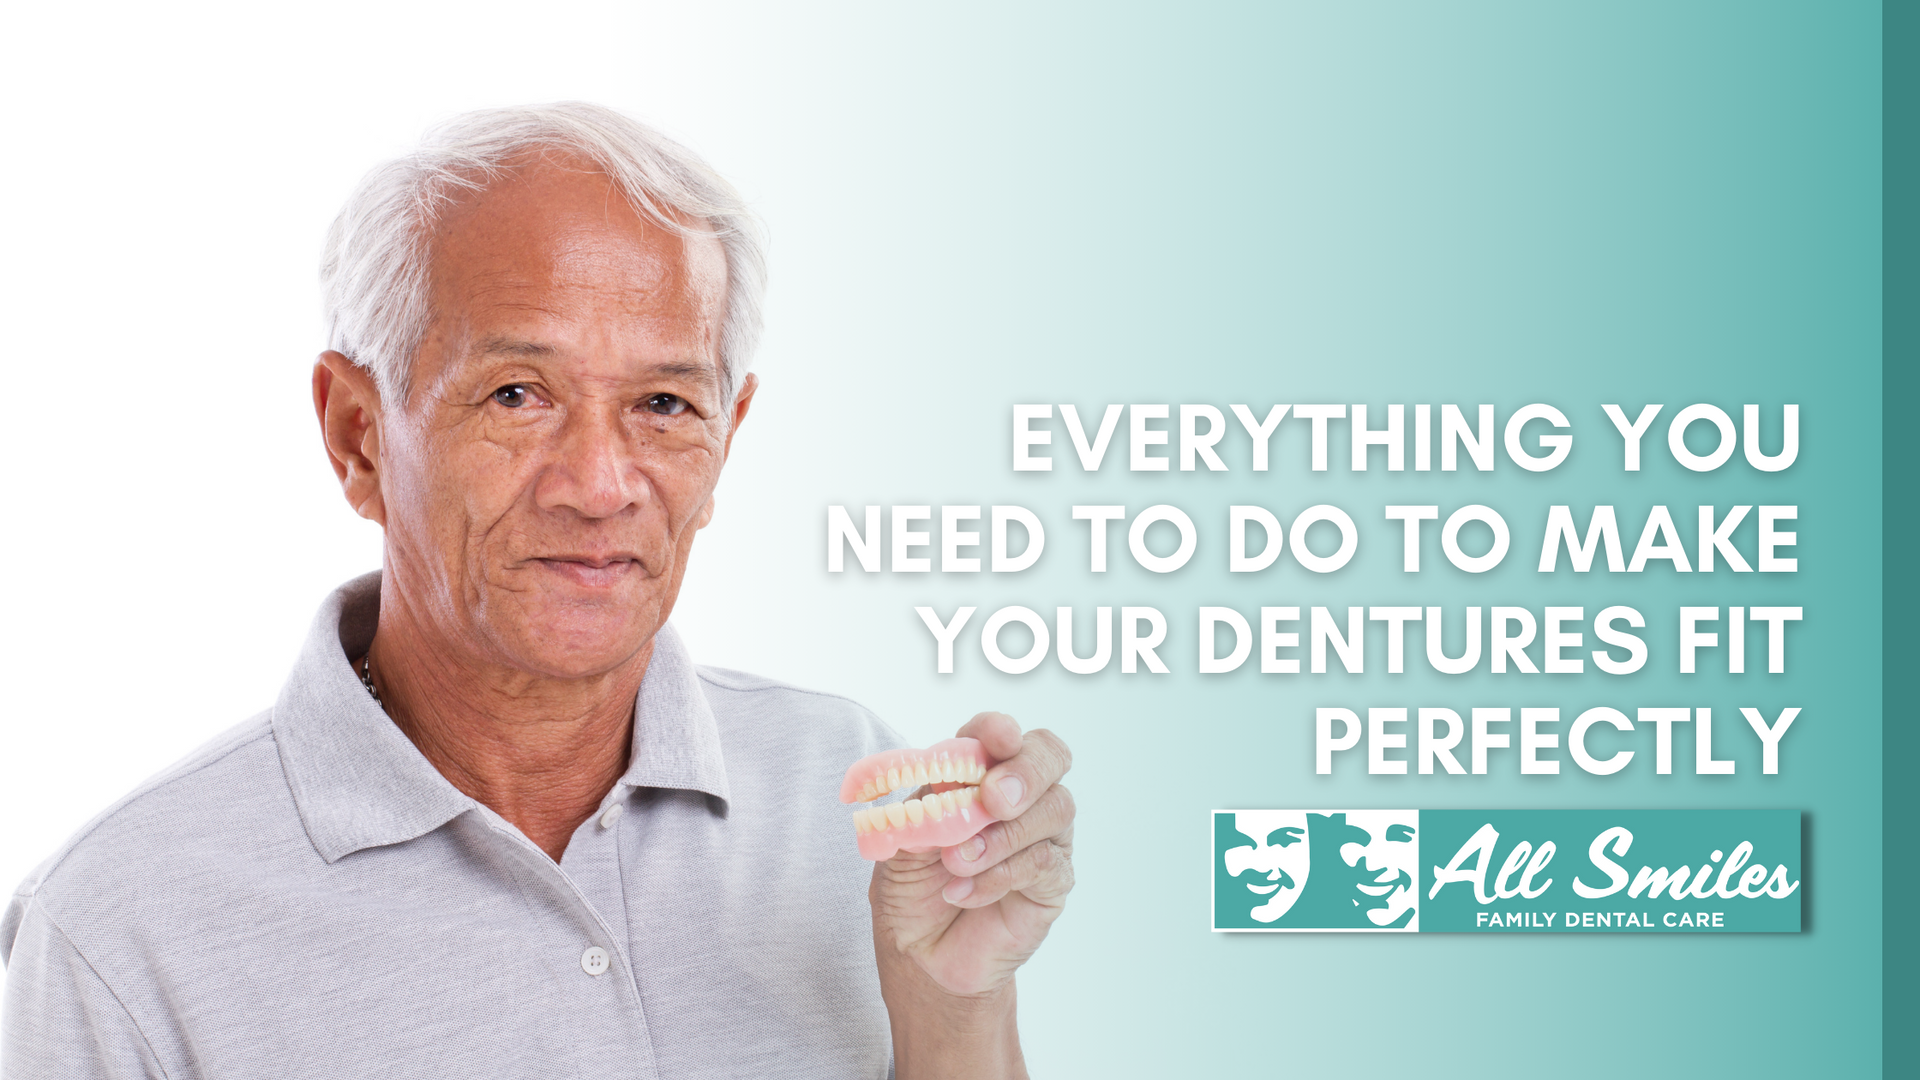 an ad for all smiles family dental care shows a man holding a denture